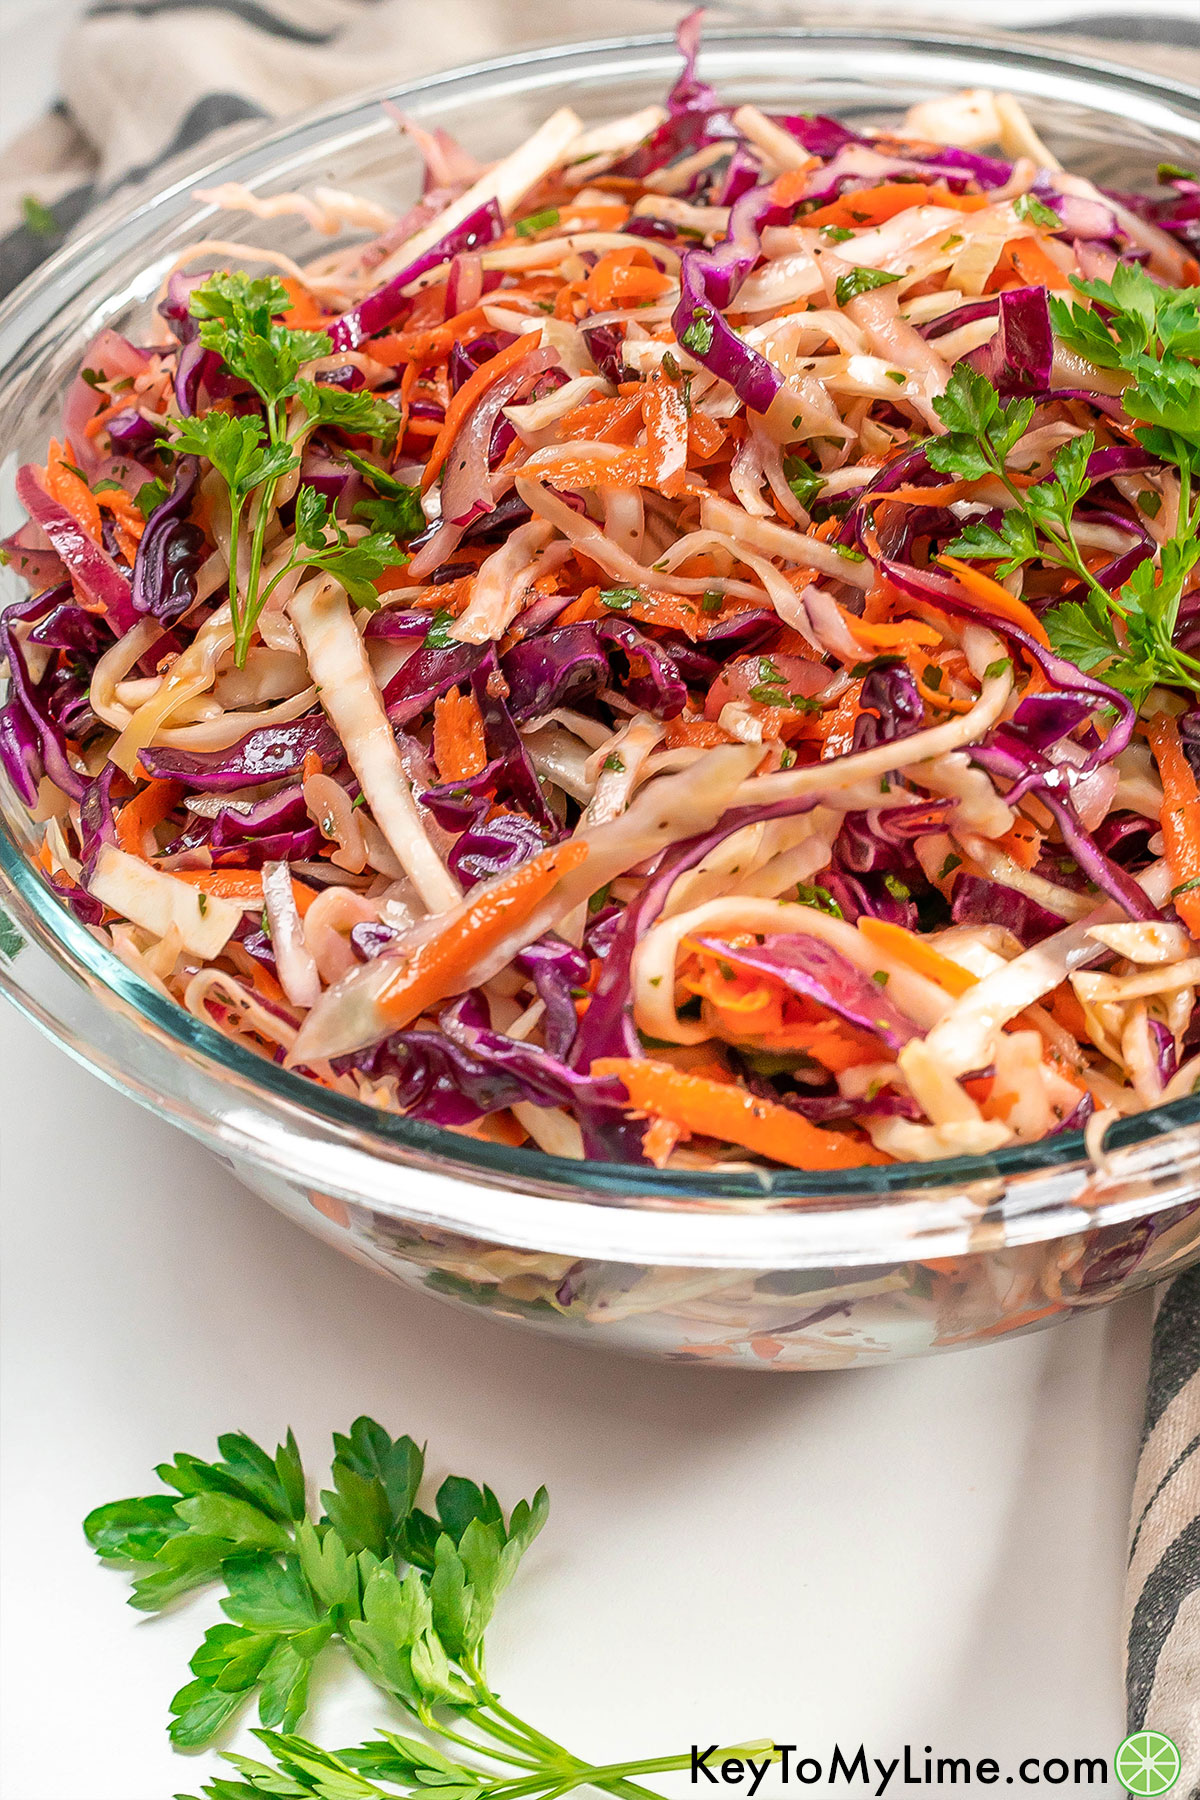 A large class bowl filled with freshly made coleslaw with a parsley leaf to the side.